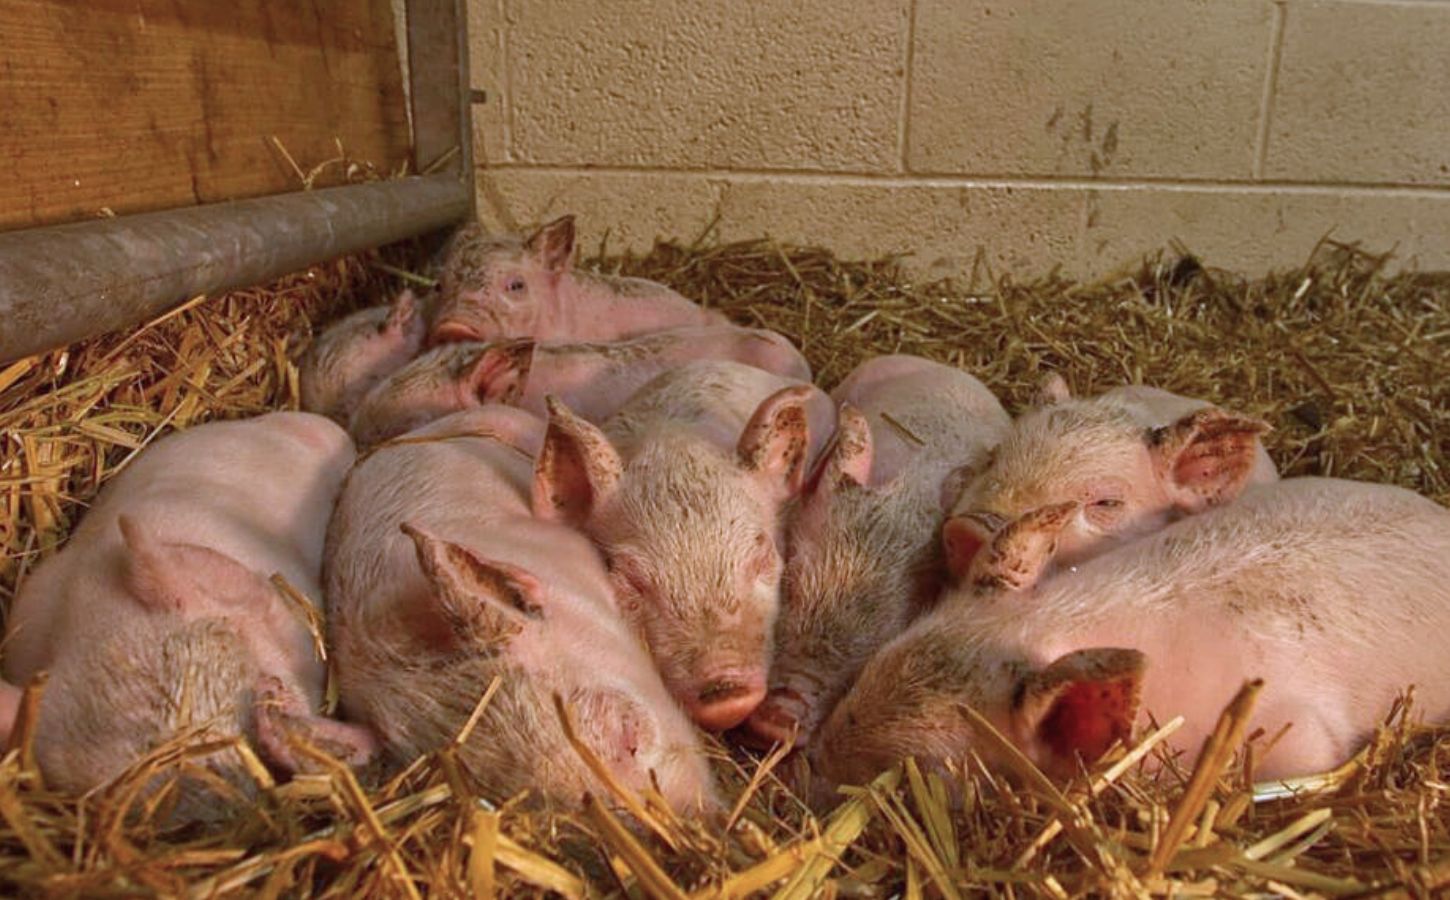 The piglets who Matilda the pig gave birth to in the woods after escaping a meat farm